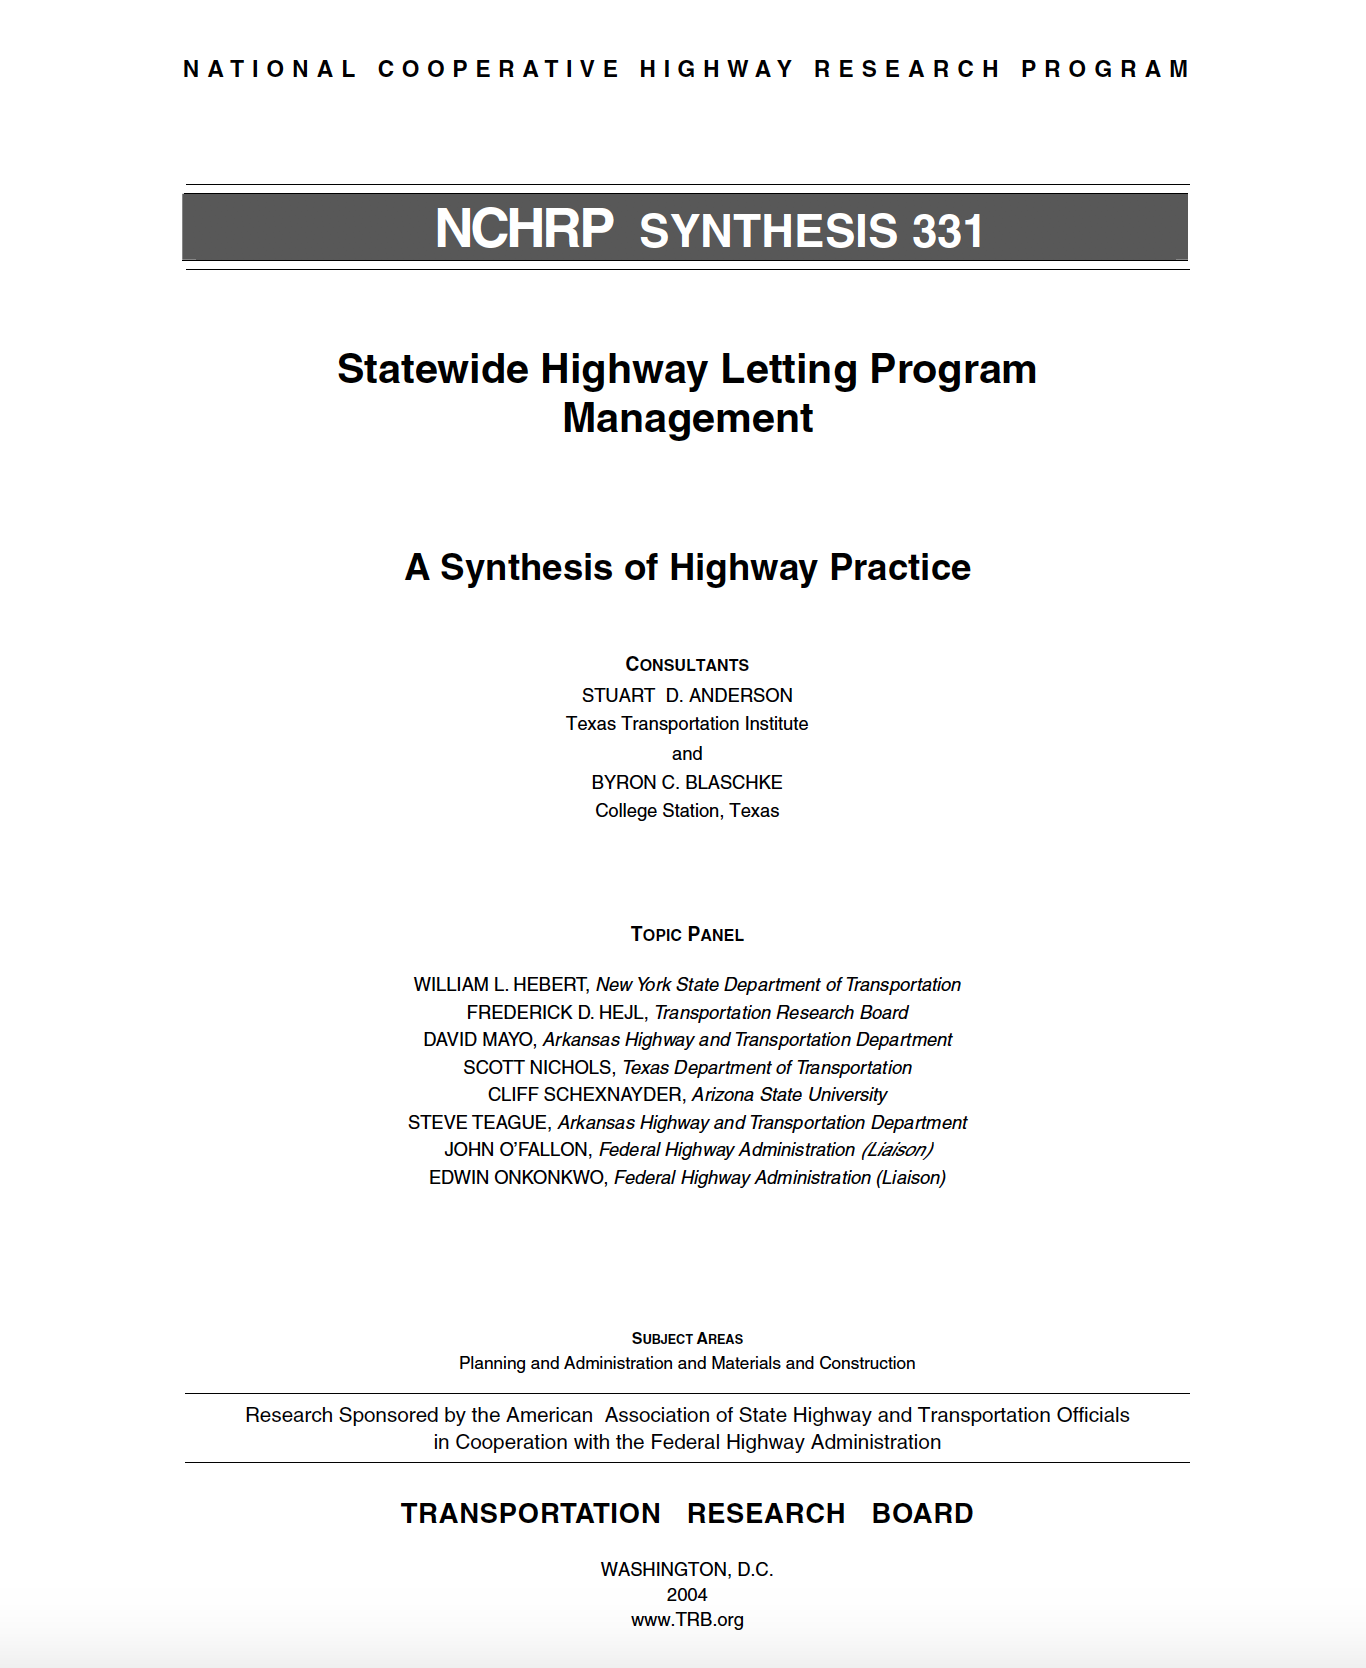 NCHRP Synthesis 331: State Highway Letting Project Management [PUB]